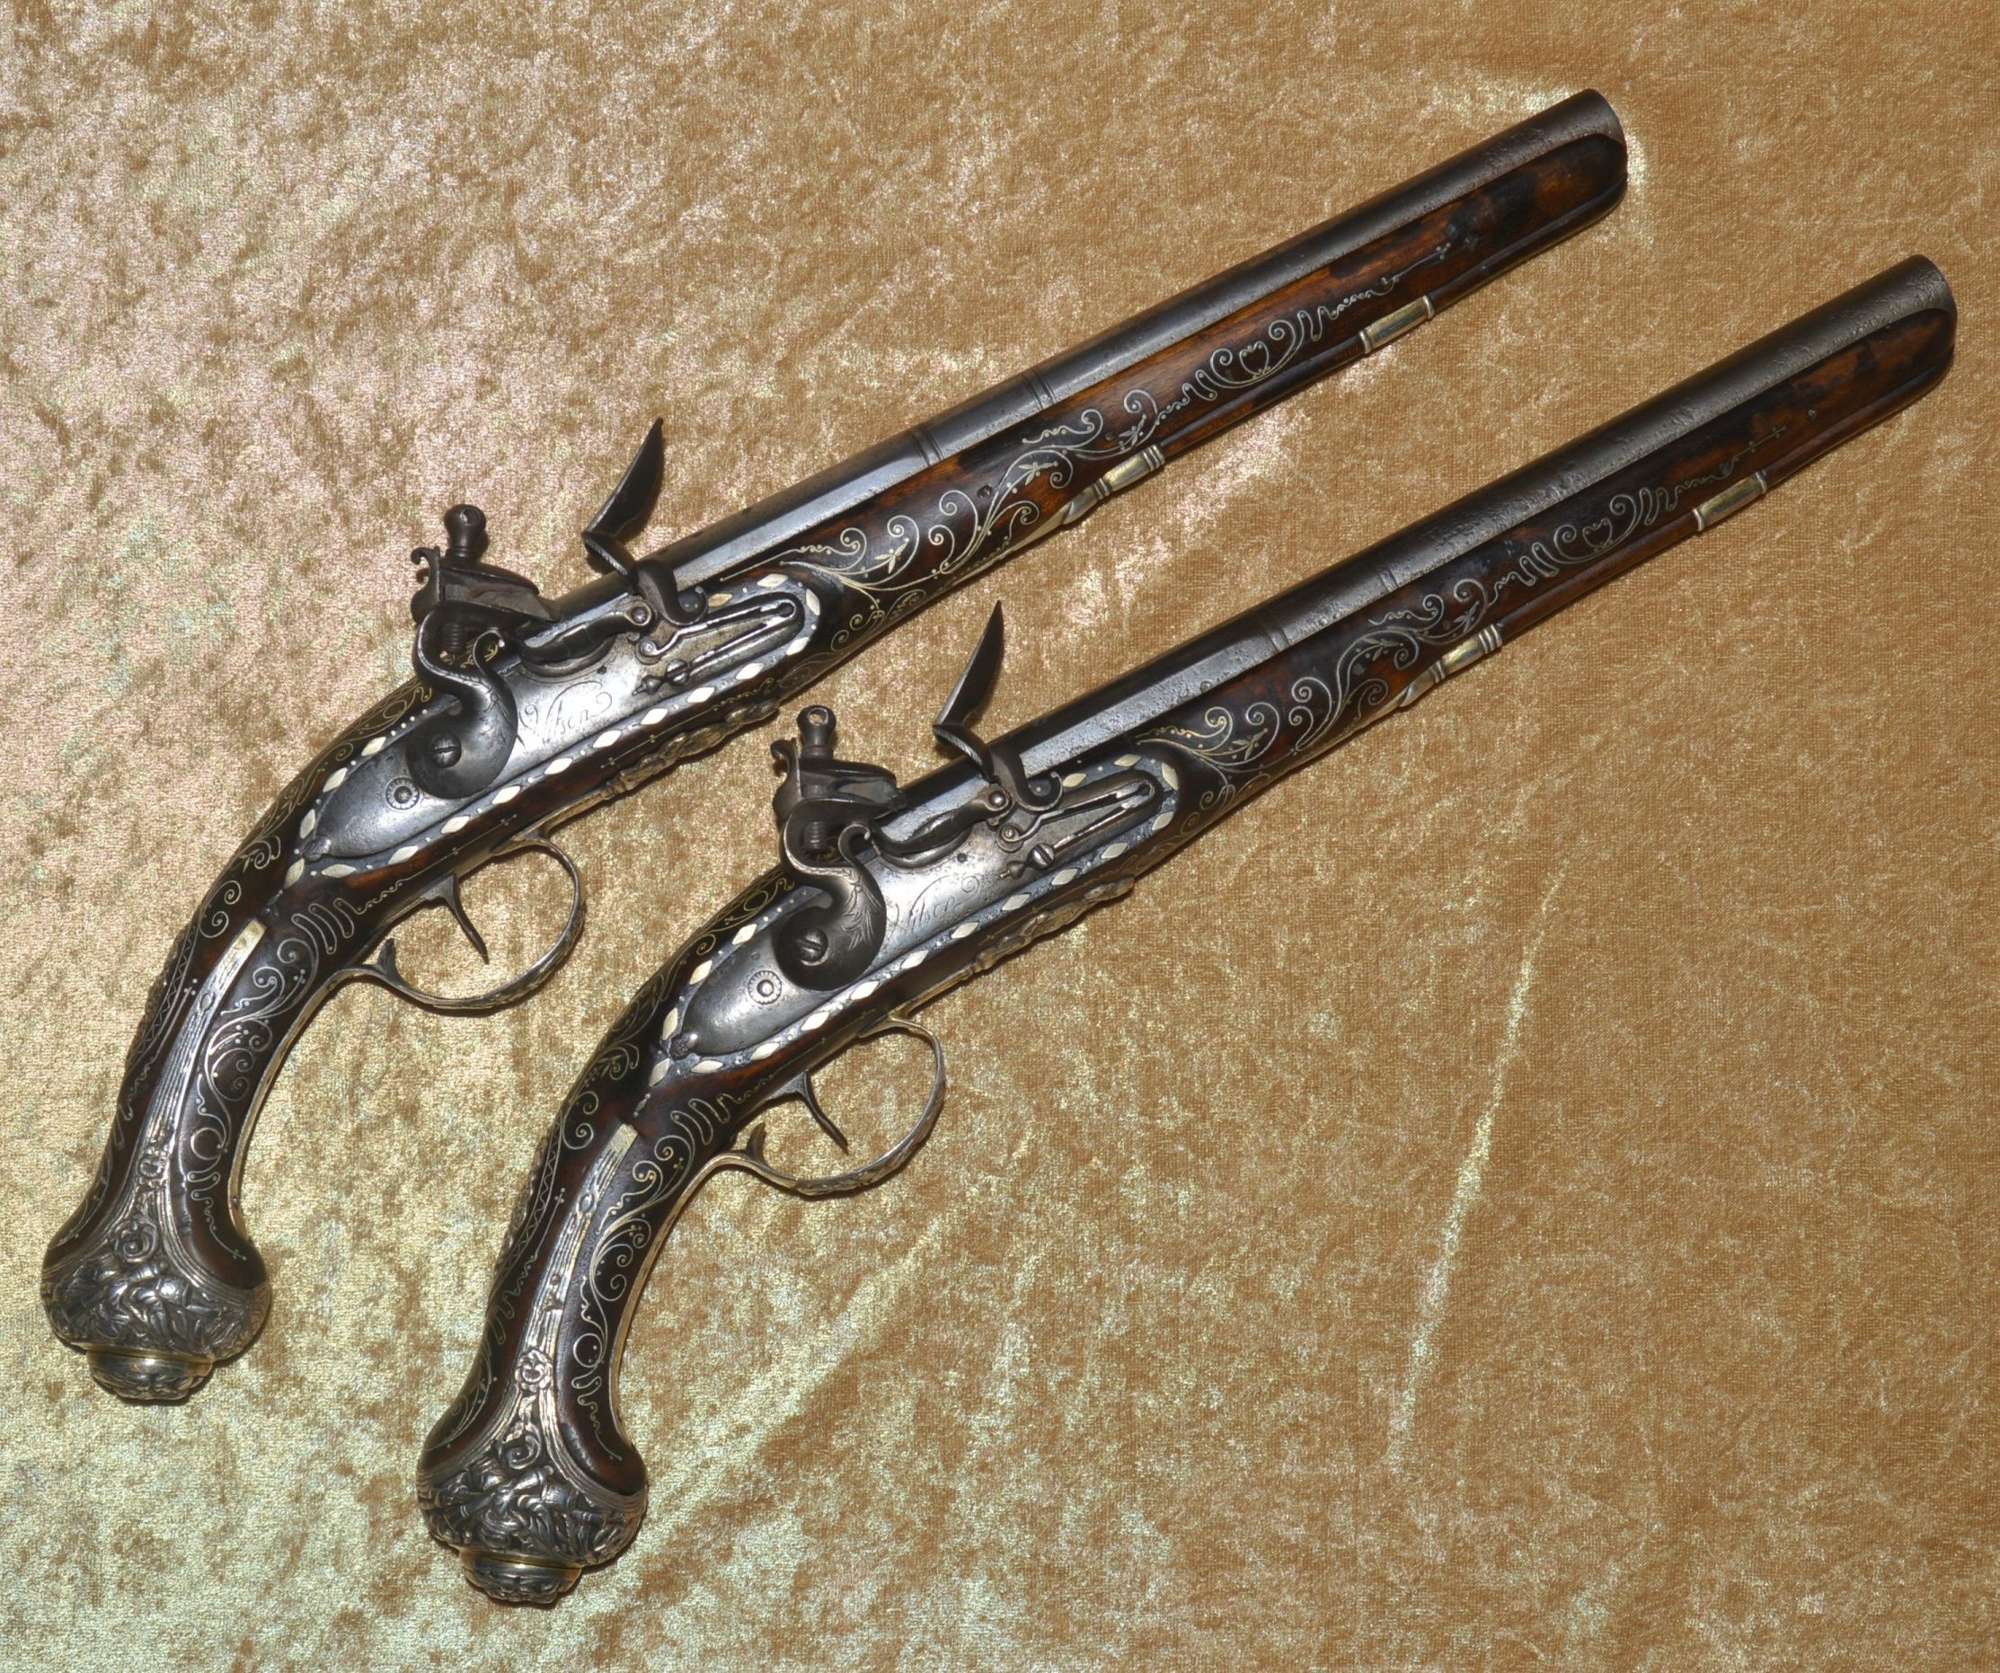 Silver-Mounted Flintlock Pistols Made for an Ottoman Potentate